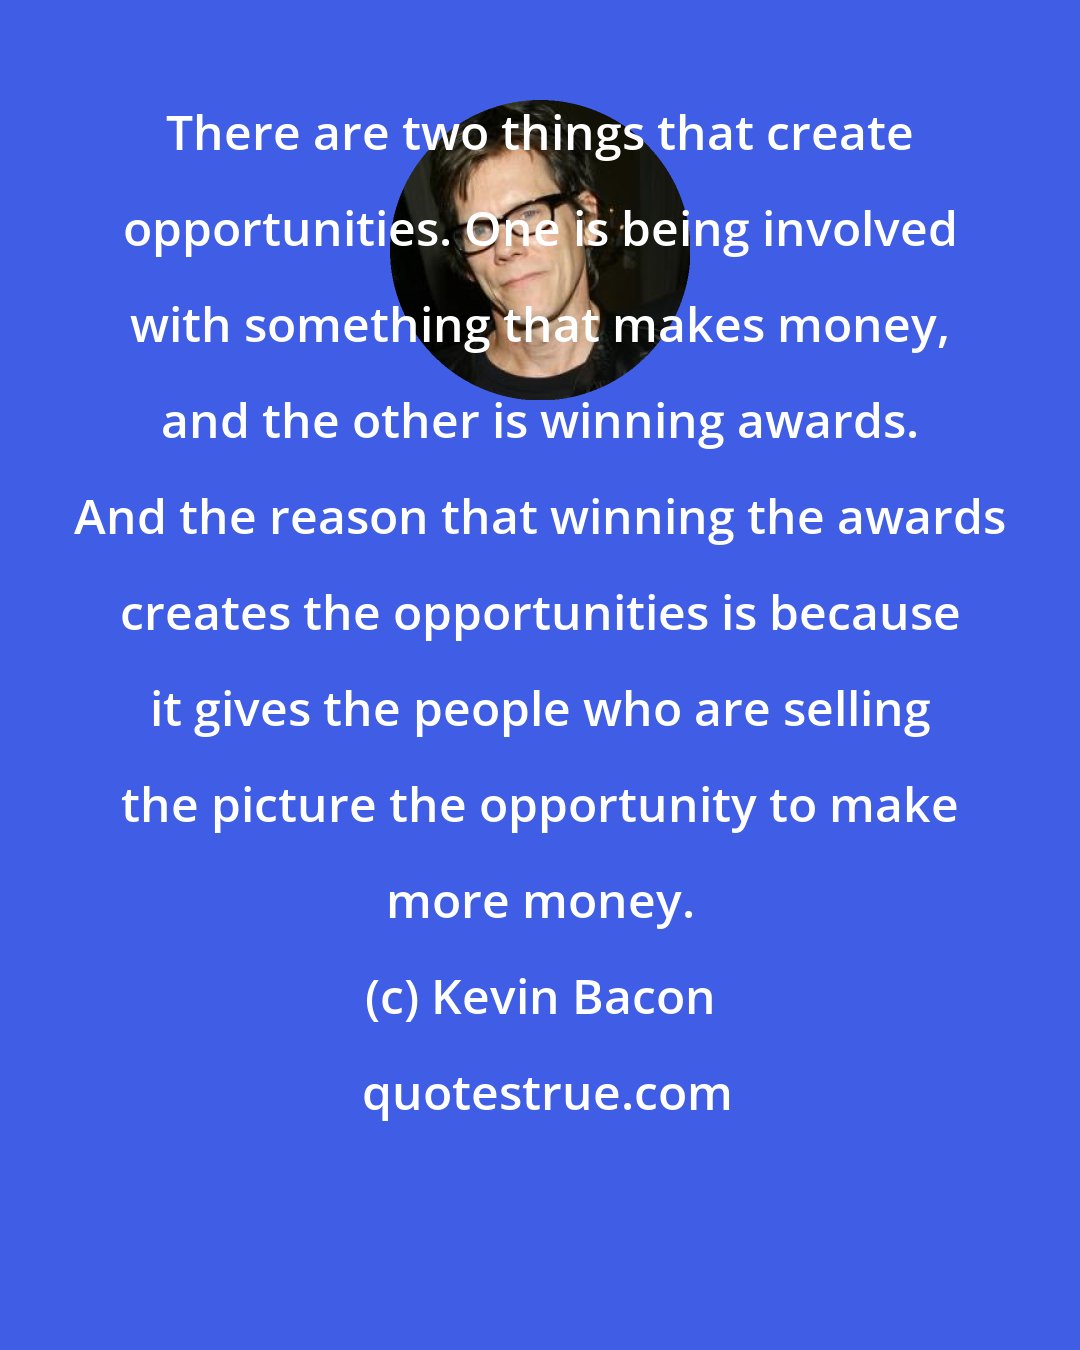 Kevin Bacon: There are two things that create opportunities. One is being involved with something that makes money, and the other is winning awards. And the reason that winning the awards creates the opportunities is because it gives the people who are selling the picture the opportunity to make more money.